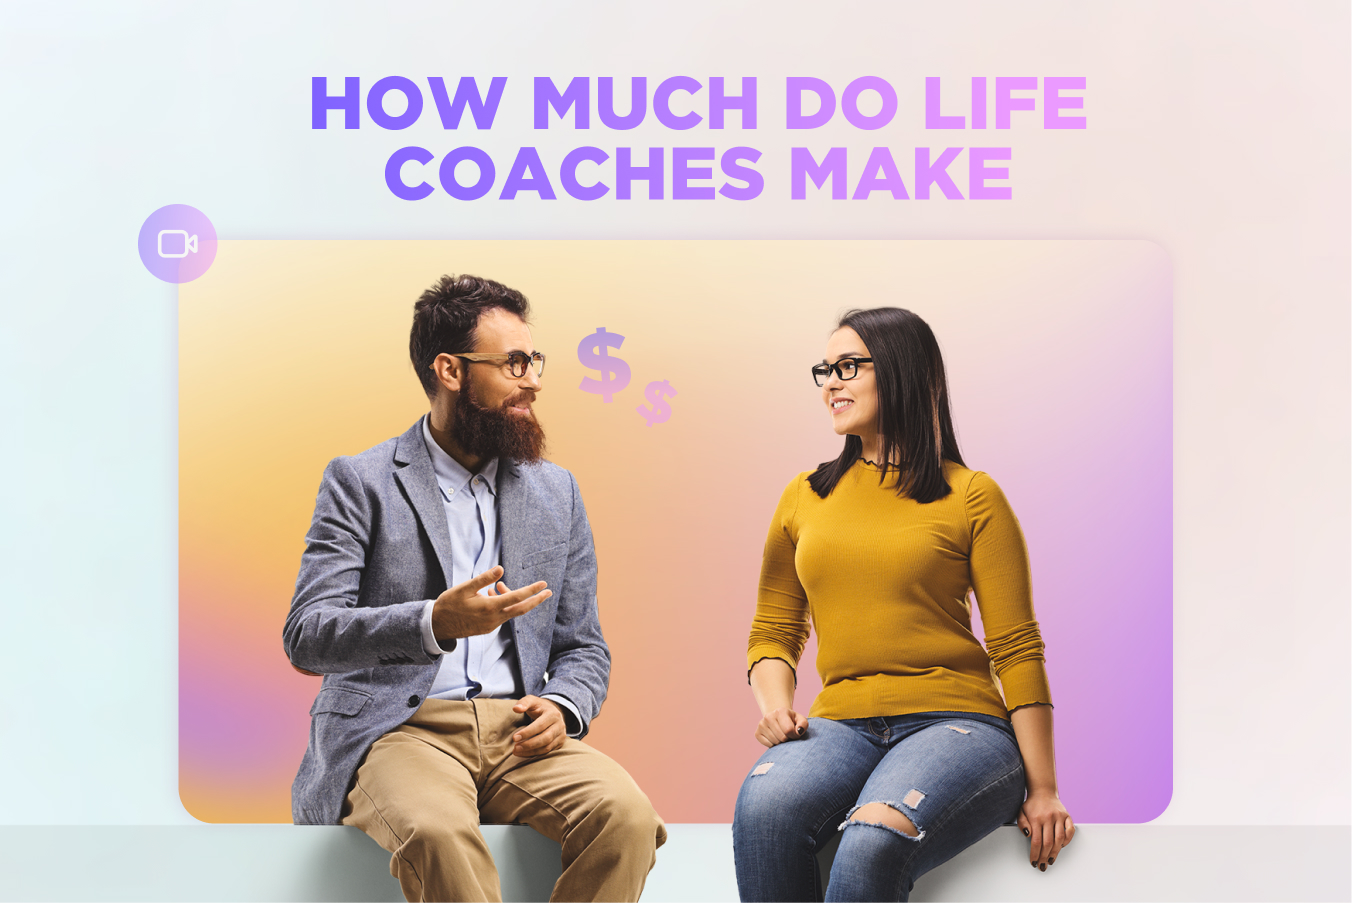 life coaches discuss their earnings